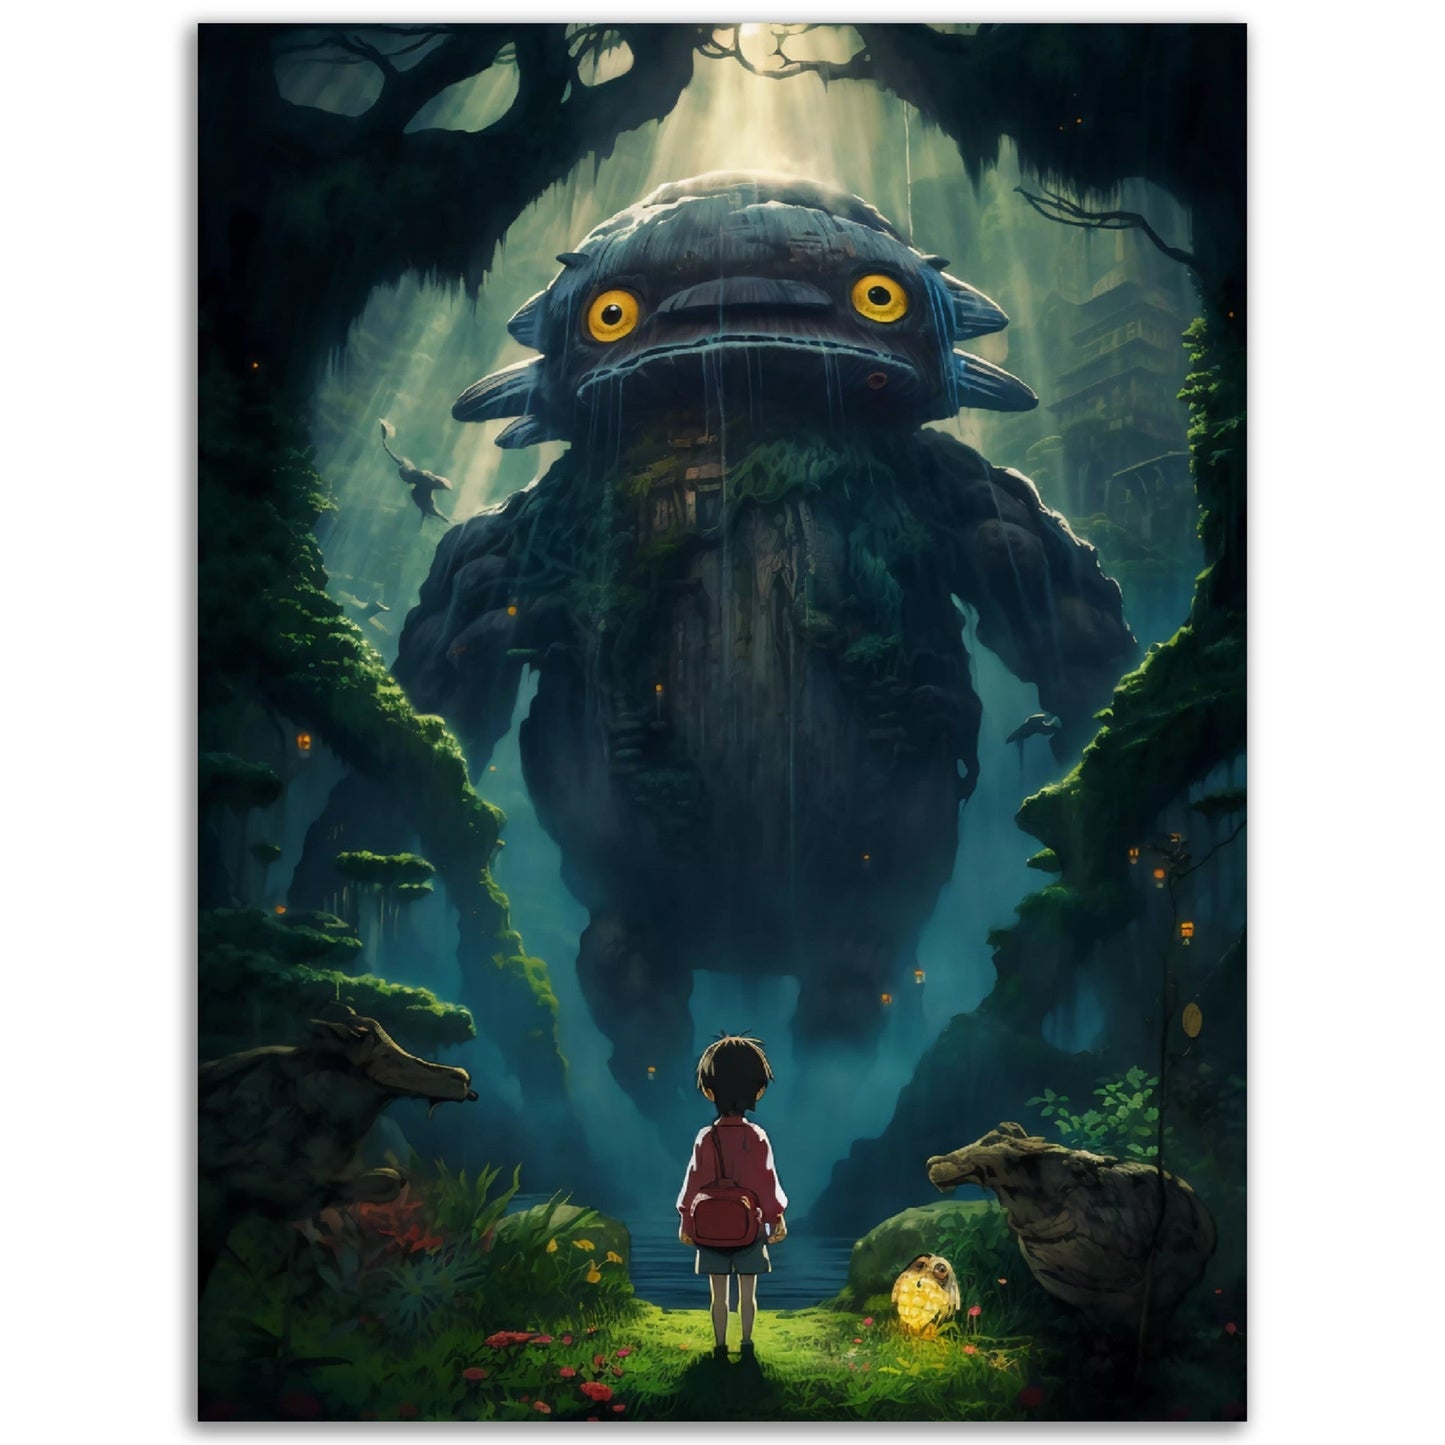 A visually striking image of a girl bravely standing before a colossal monster in the enchanting forest, captured on the "We Are Large But We Are Friends" poster.